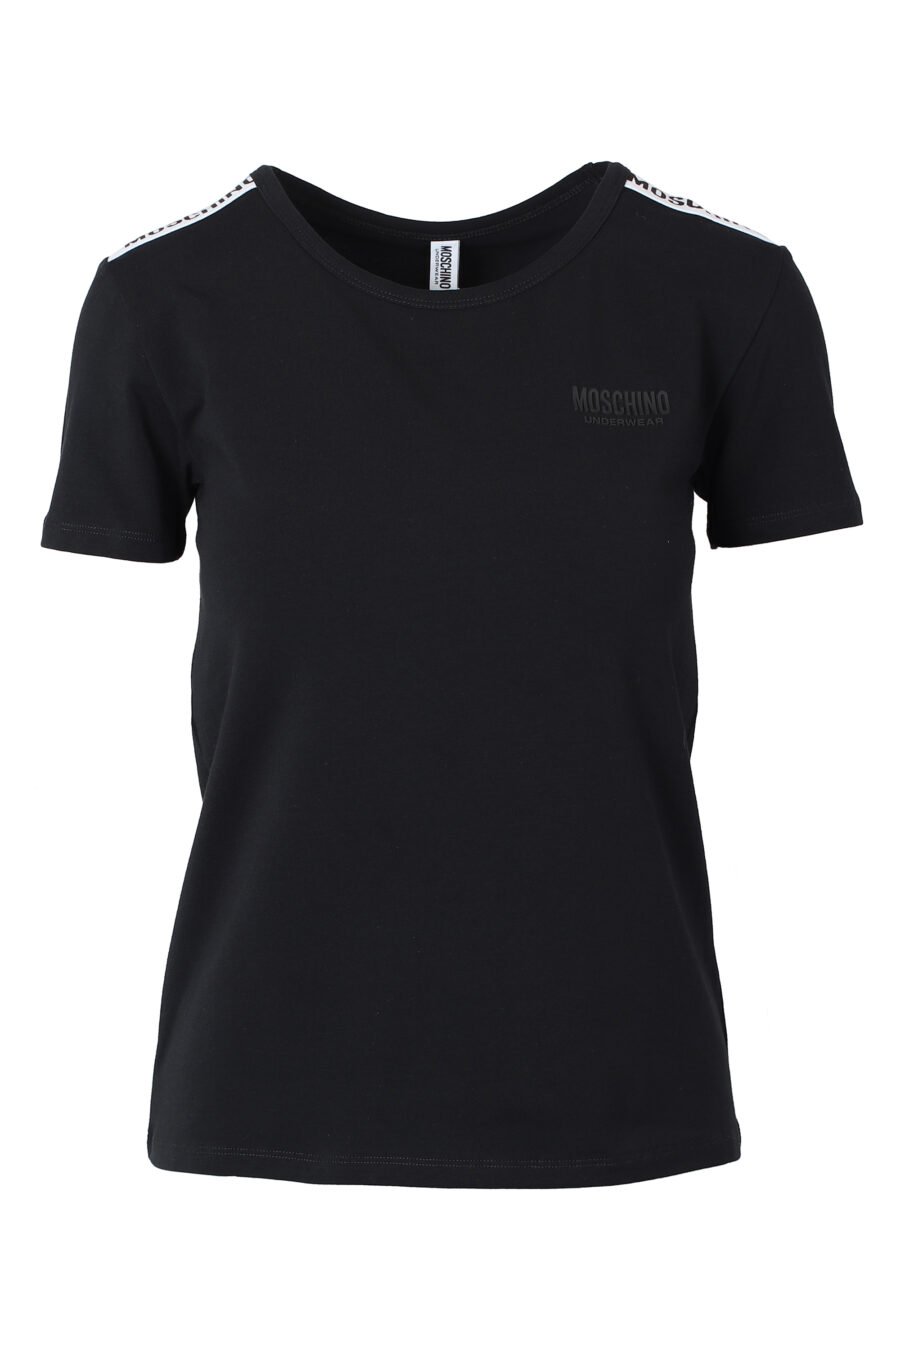 Black slim fit T-shirt with logo tape on shoulders - IMG 9823